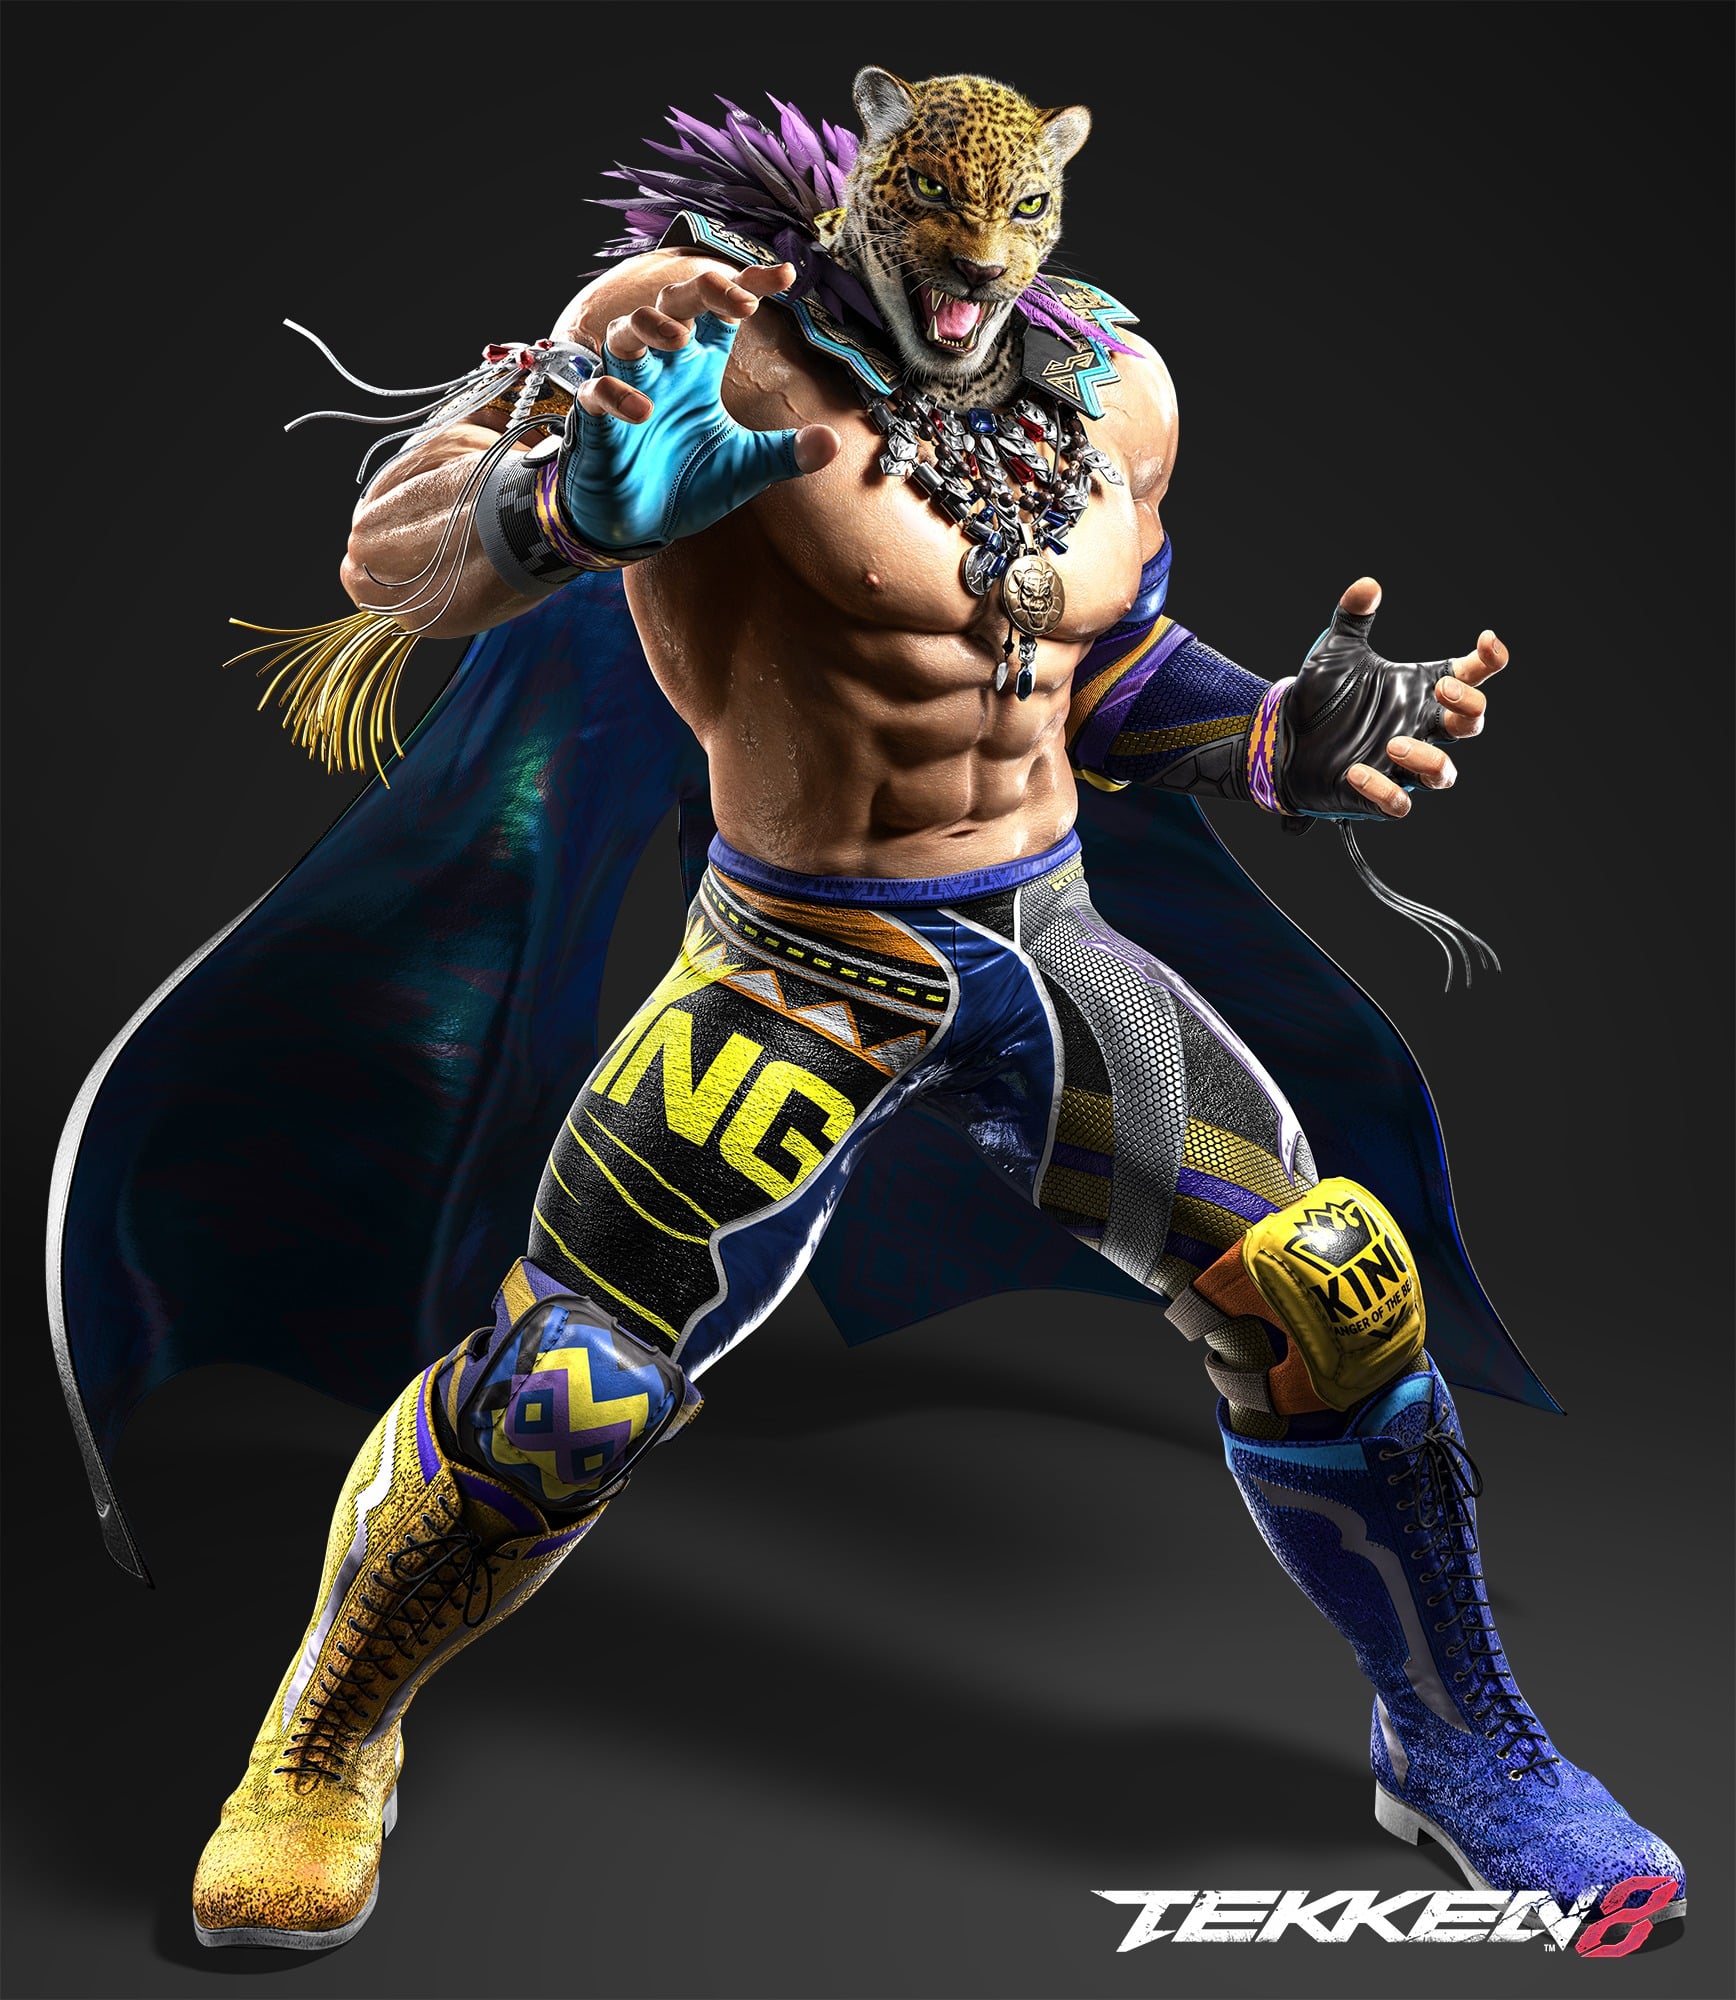 Official character render of King